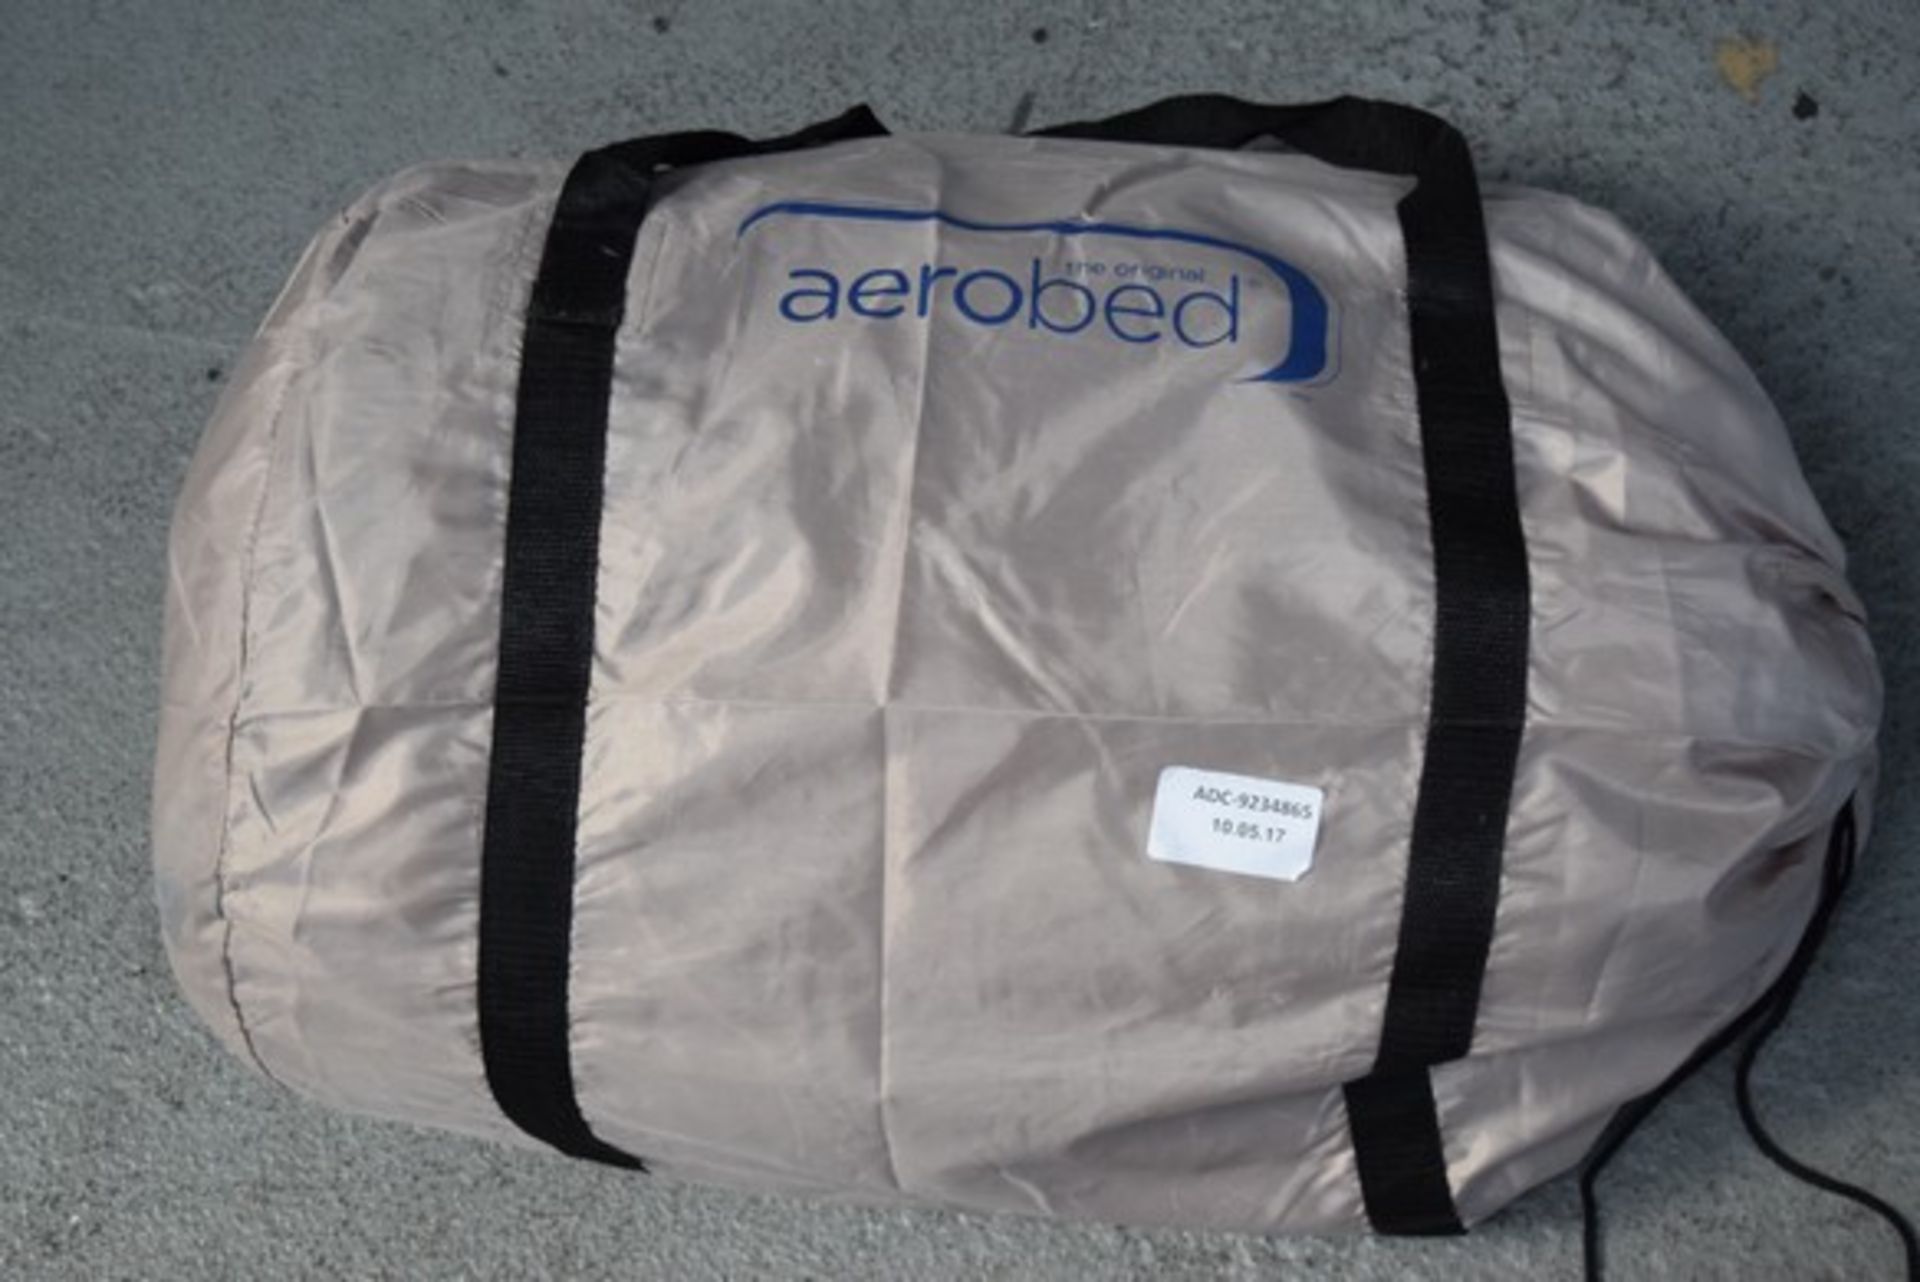 1 x AEROBED ULTRA DIVAN (UNKNOWN SIZE) RRP £180 10.05.17 *PLEASE NOTE THAT THE BID PRICE IS